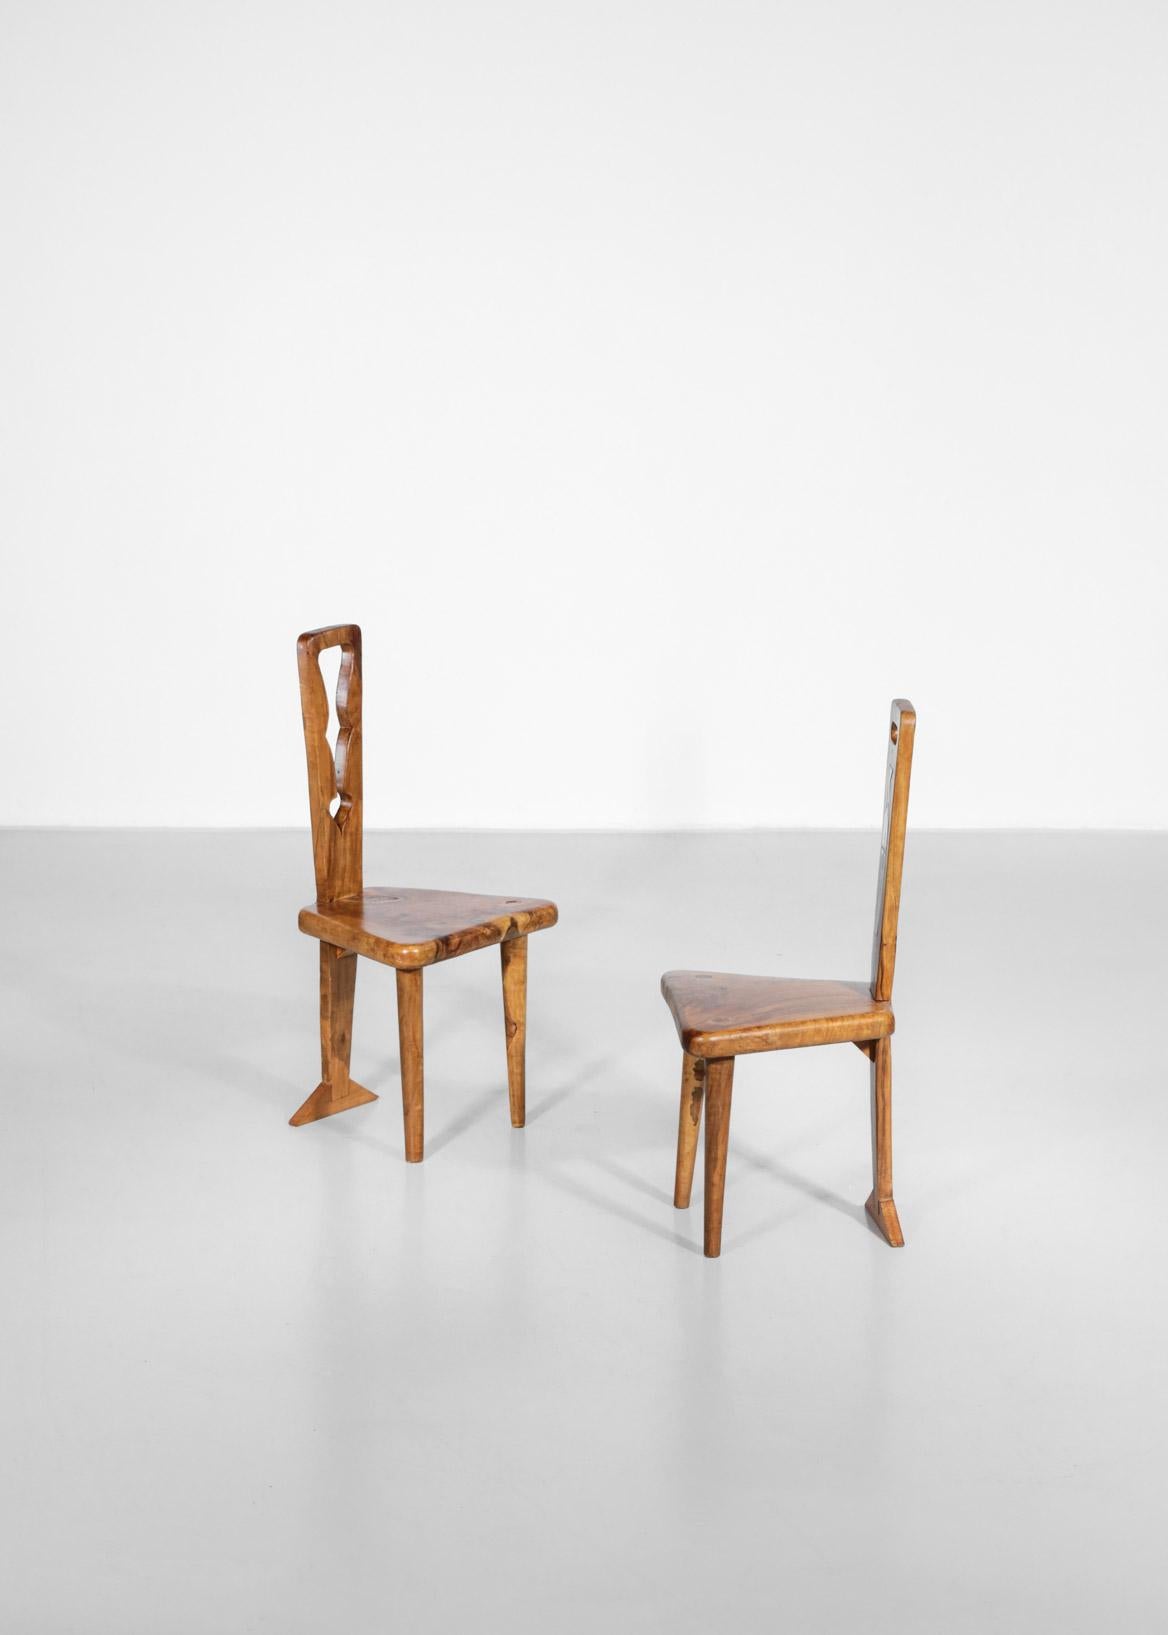 Mid-20th Century Set of 6 Artisanal Chairs, Olive Wood and Ceramic, 1960s